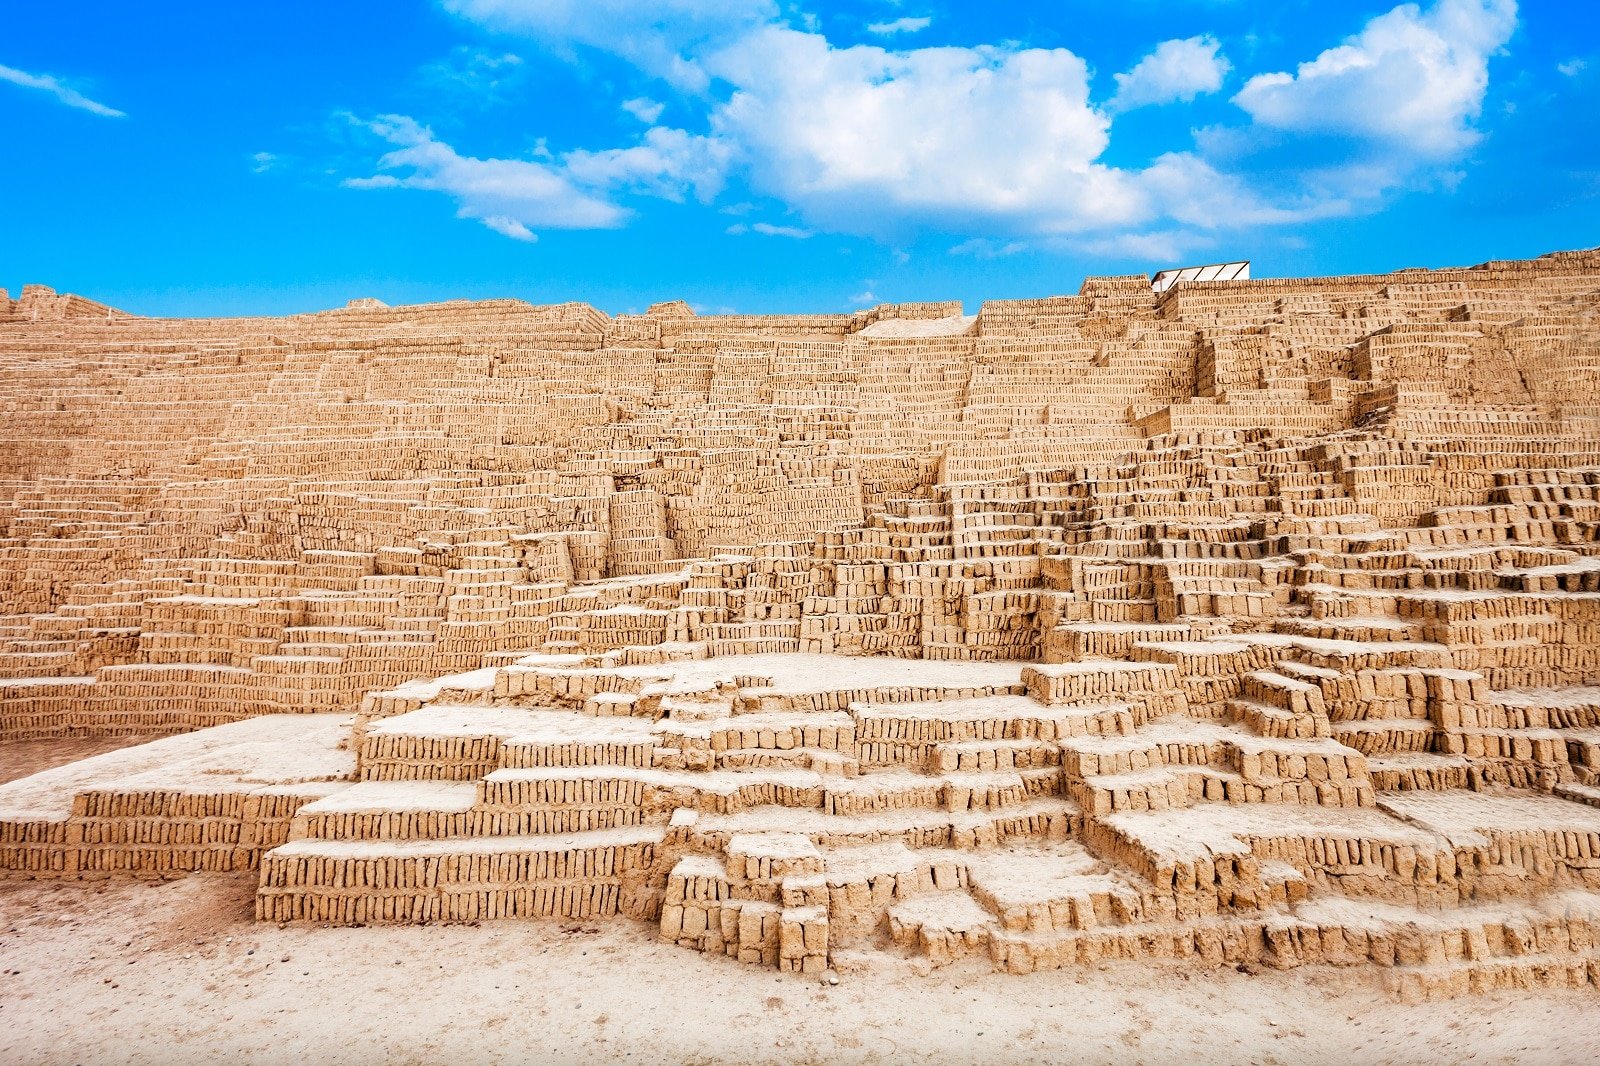 <p><span>In Lima, Peru, discover Huaca Pucllana, a pre-Columbian pyramid made entirely of adobe bricks. Amidst the urban landscape, this pyramid is a stark reminder of the region’s rich pre-Incan history.</span></p> <p><b>Traveler’s Insight: </b><span>Take a guided tour at night when the pyramid is beautifully illuminated, offering a unique perspective to its magic.</span></p> <p><b>Getting There: </b><span>Huaca Pucllana is in the Miraflores district of Lima, easily accessible by taxi or public transport from anywhere in the city.</span></p> <p><b>Things to Consider: </b><span>The site is in an urban area, so it’s a convenient visit. Guided tours are available and recommended to understand the site’s history better. The night tour offers a different perspective with the pyramid lit up.</span></p>